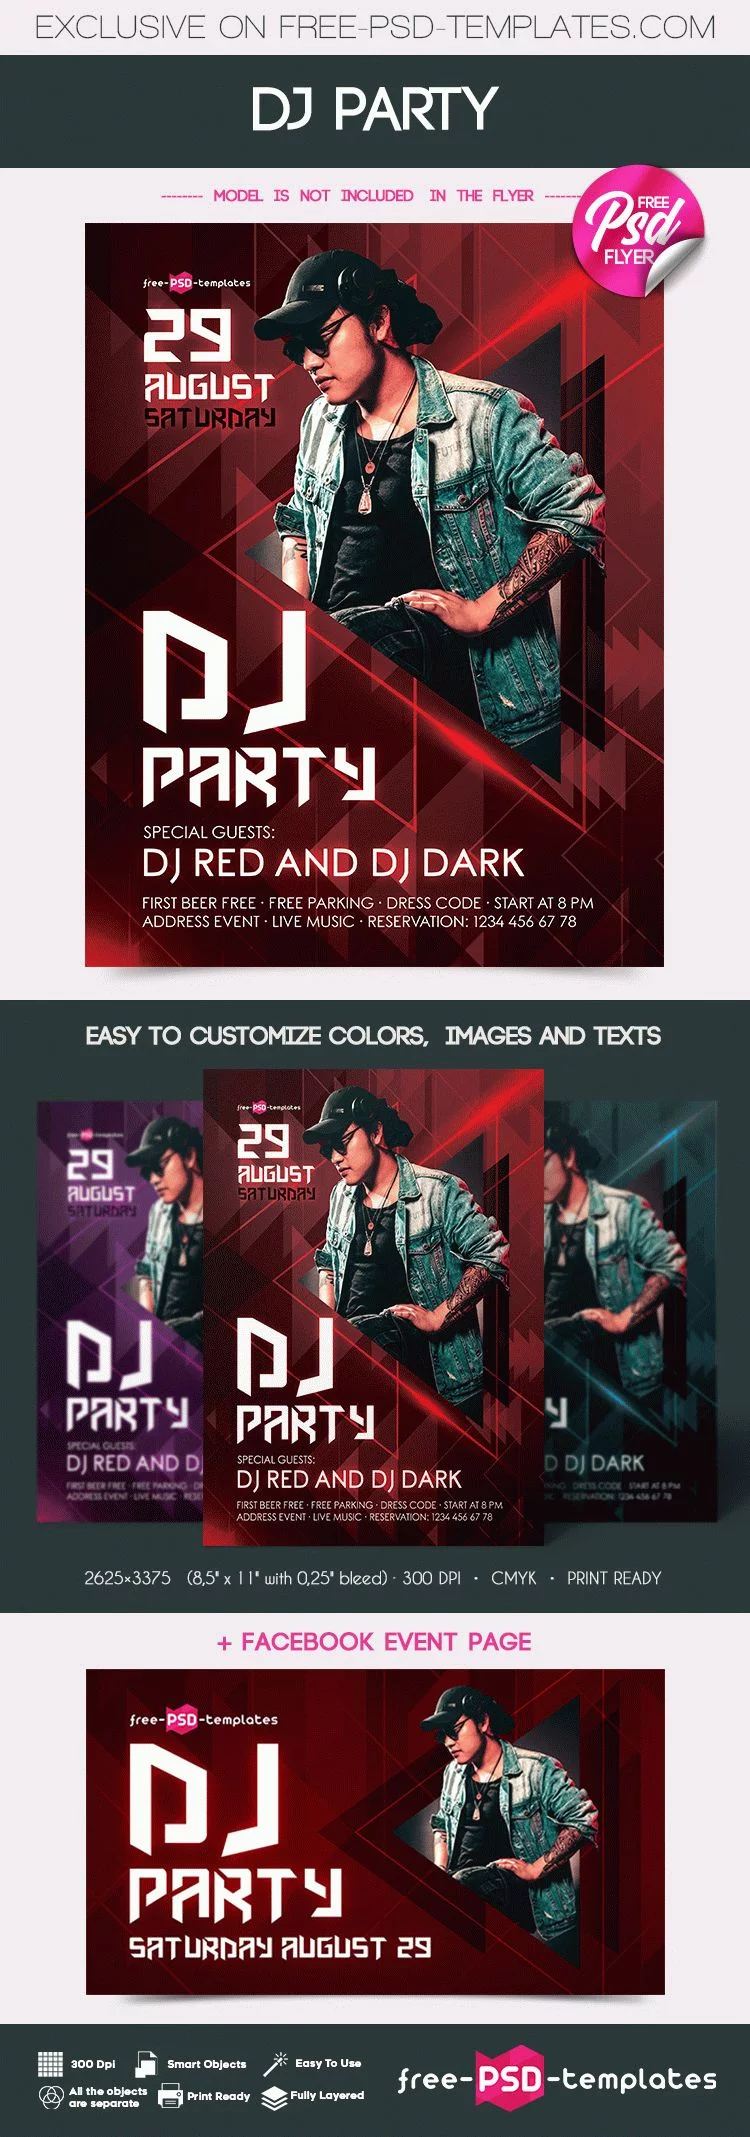 Free DJ Party Flyer in PSD